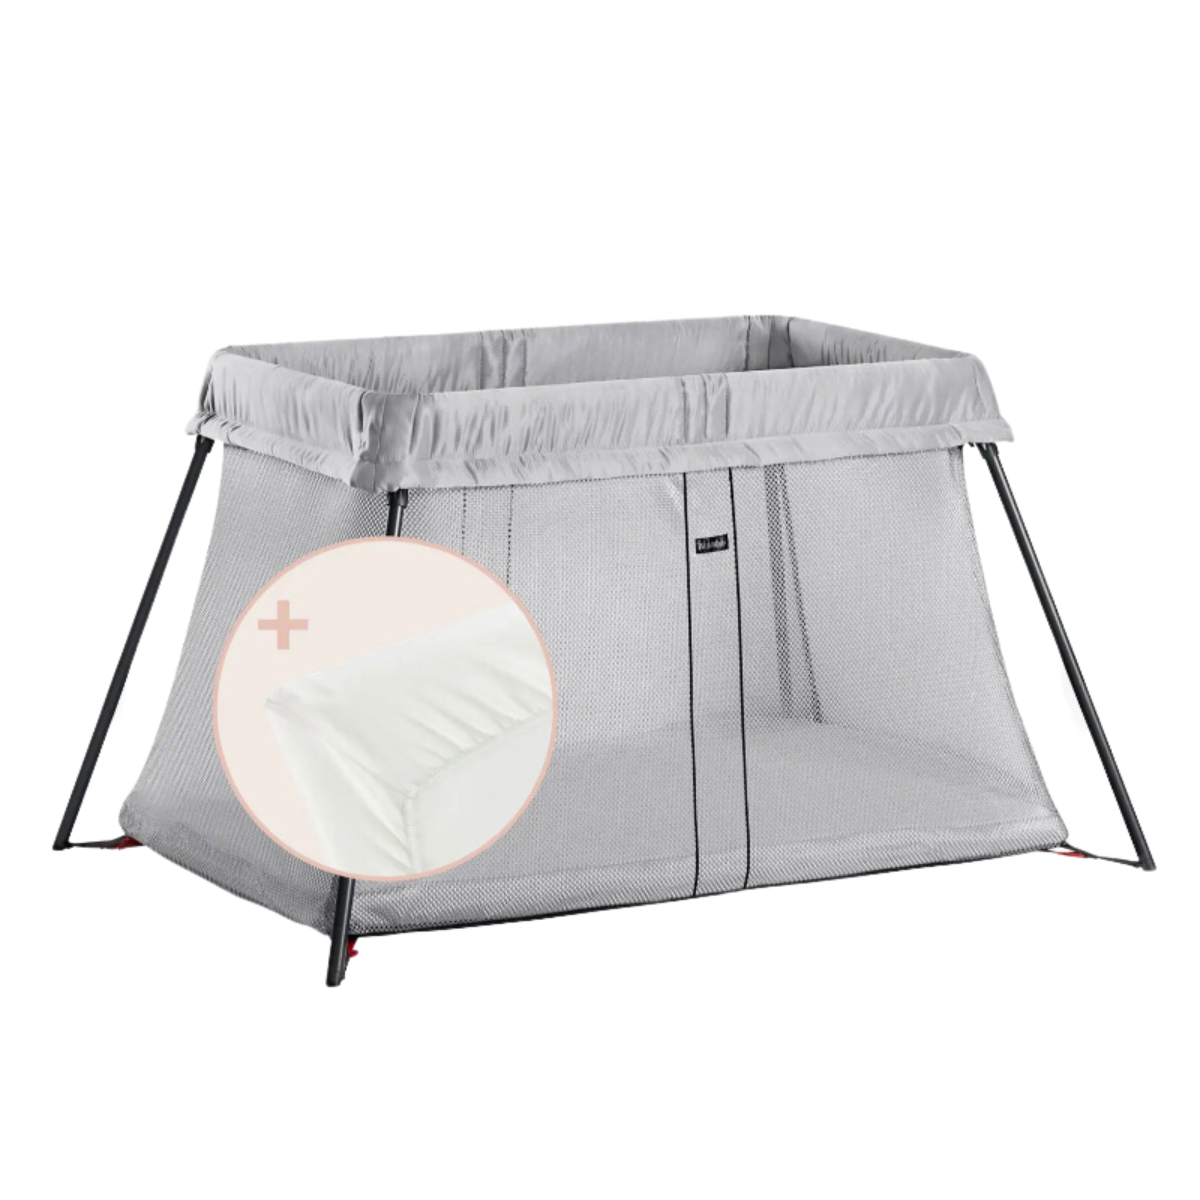 <p>The Babybjörn Travel Crib is a parent favorite, largely because it’s one of the lightest around—it weighs just 13 pounds. Our testers said it was also one of the easiest cribs to assemble and disassemble into the carrying case. Perhaps even more importantly, parents say it feels very well made—some traveled with it for years with little to no wear and tear. The crib also comes with a fitted sheet set, so you don’t have to do any additional shopping.</p> <p><strong>What our tester said:</strong> “I never left home without this when my kids were in cribs. It’s light and easy to travel with, plus it collapses easily and feels really well made. Most importantly, my kids always seemed very comfortable.”</p> <ul> <li><strong>Pros:</strong> Lightweight, durable, easy to assemble, airy mesh sides</li> <li><strong>Cons:</strong> Expensive</li> <li><strong>Our tester’s grade:</strong> A</li> <li><strong>Setup:</strong> A+ <strong>|</strong> <strong>Durability:</strong> A <strong>| Portability:</strong> A <strong>|</strong> <strong>Overall Value:</strong> A-</li> <li><strong>Weight:</strong> 13 pounds</li> <li><strong>Dimensions:</strong> 32 x 44 x 24 inches</li> <li><strong>Age Range:</strong> 0-3 years</li> </ul> <p><em>Save when you shop the best travel cribs with these <a href="https://www.glamour.com/coupons/nordstrom?mbid=synd_msn_rss&utm_source=msn&utm_medium=syndication">Nordstrom promo codes</a>.</em></p> $300, Nordstrom. <a href="https://www.nordstrom.com/s/travel-crib-sheet-bundle/7506154">Get it now!</a><p>Sign up for today’s biggest stories, from pop culture to politics.</p><a href="https://www.glamour.com/newsletter/news?sourceCode=msnsend">Sign Up</a>